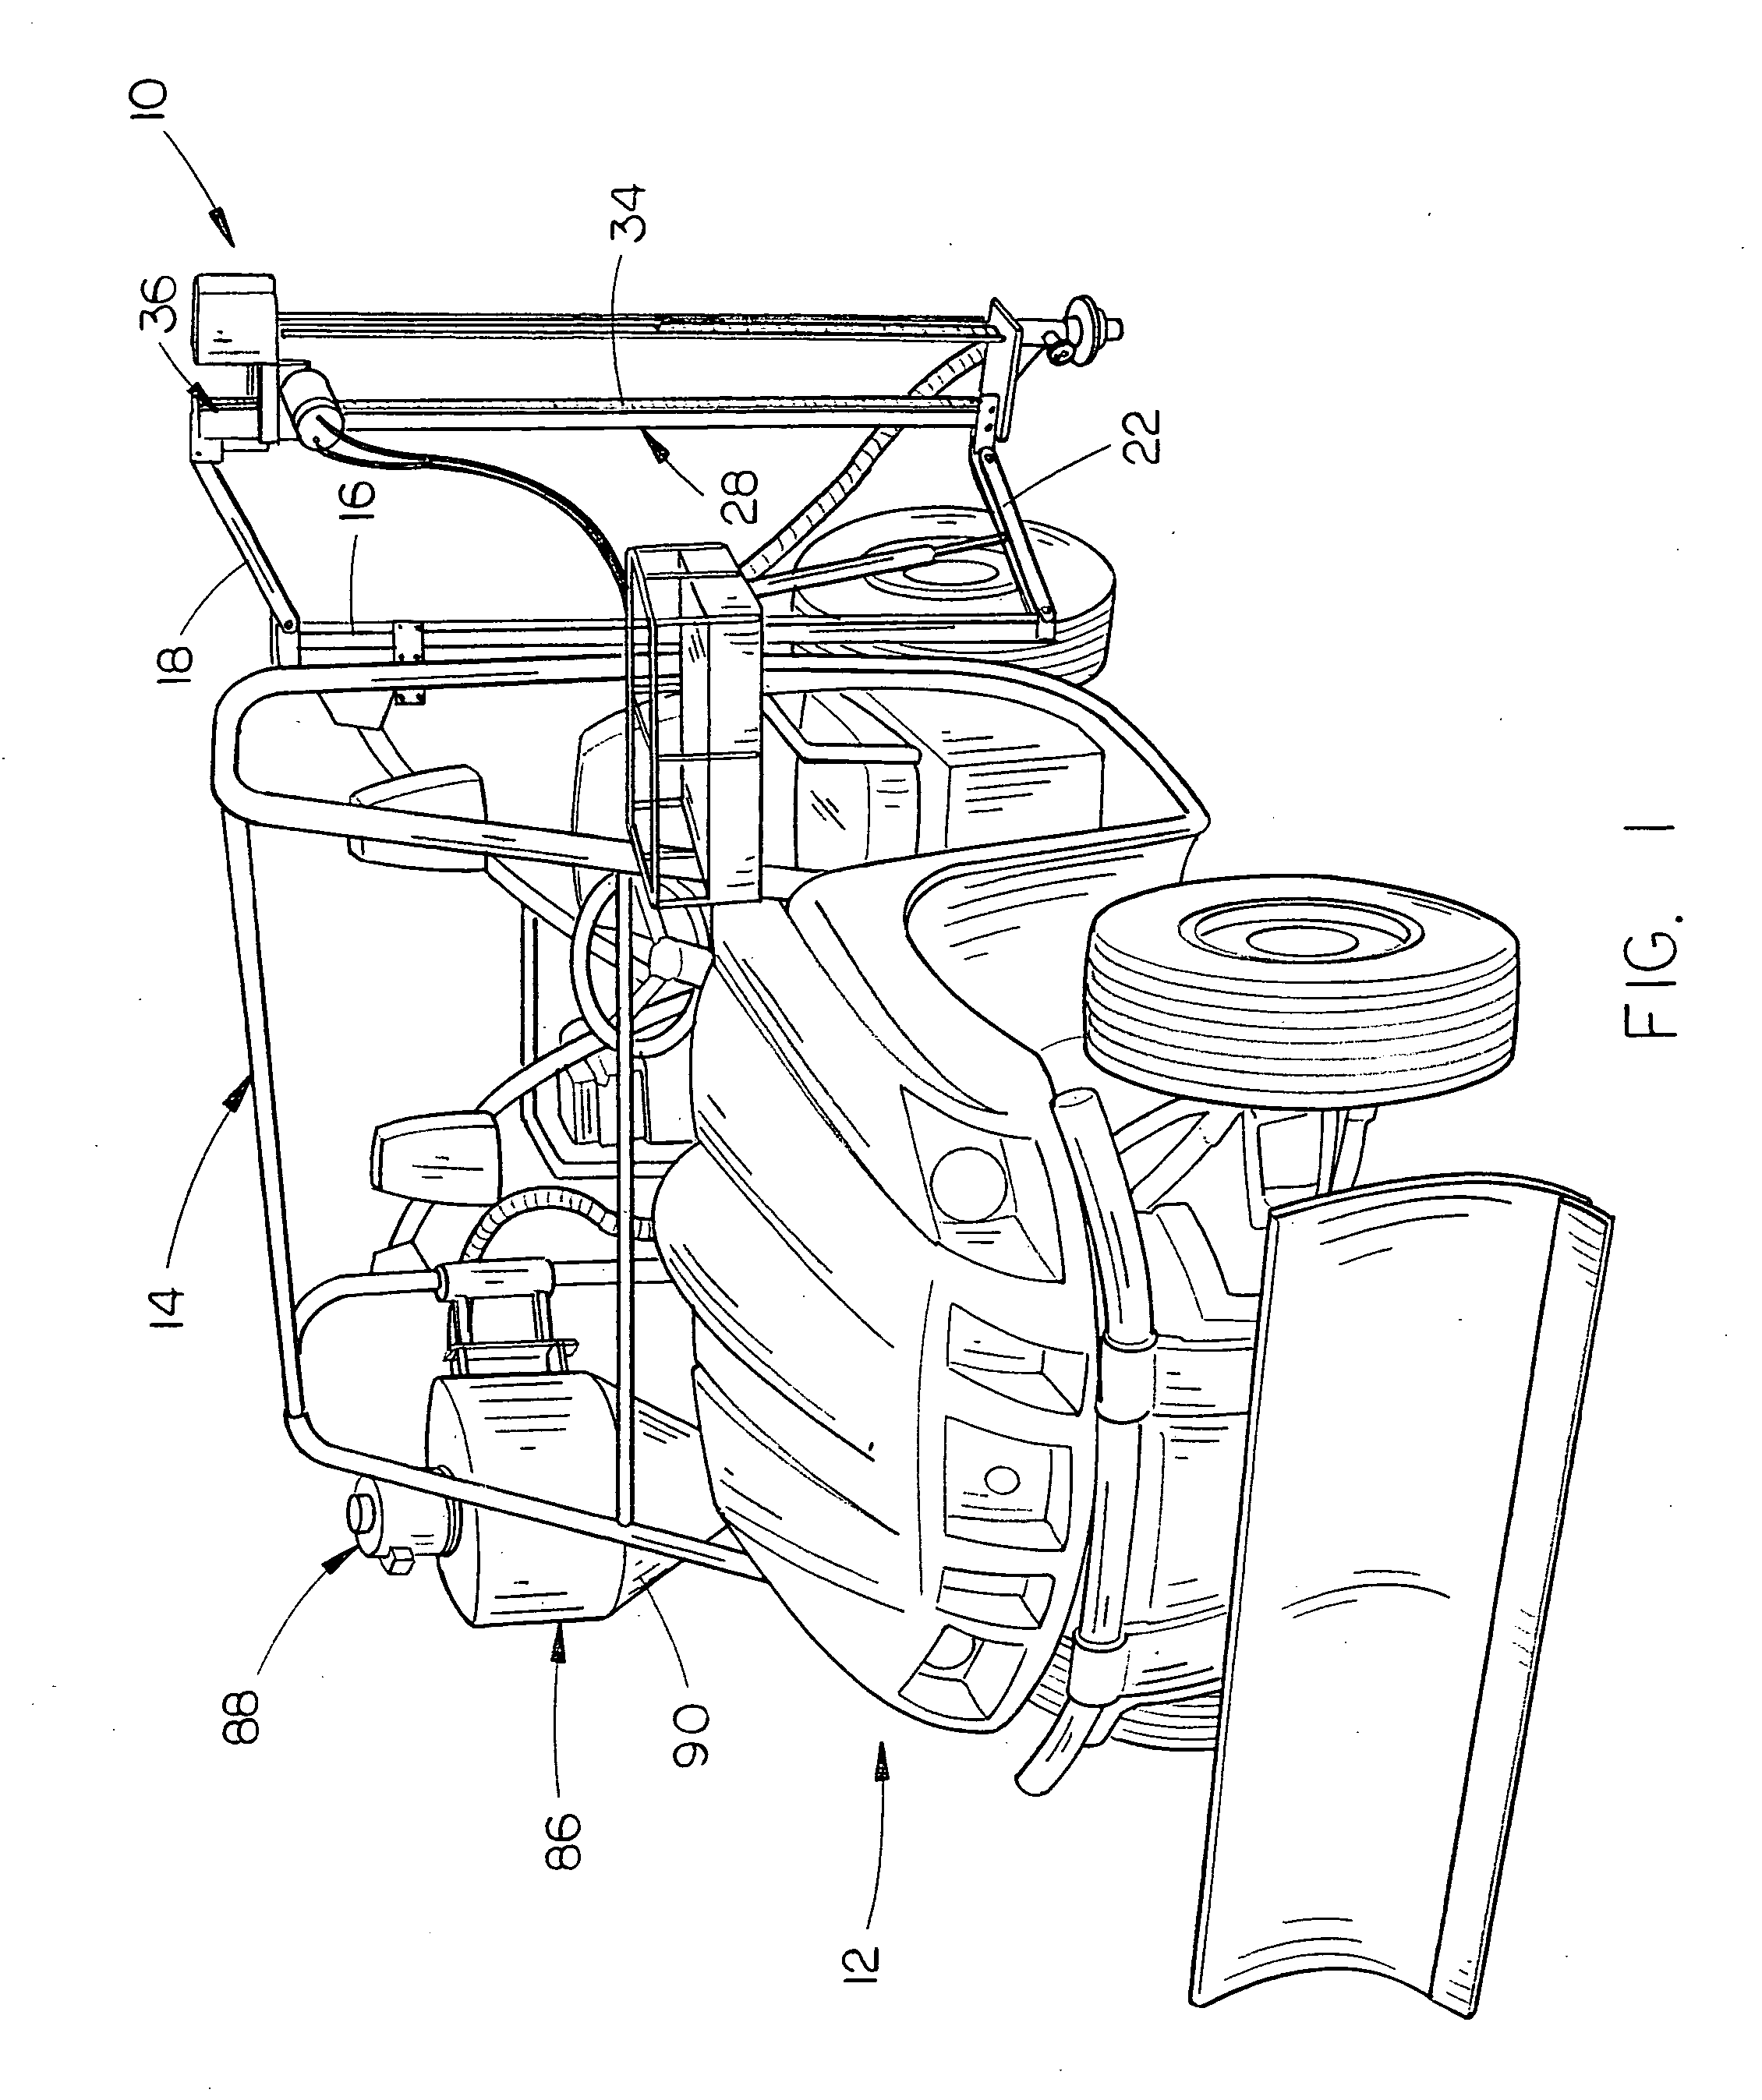 Mobile soil sampling device with vacuum collector